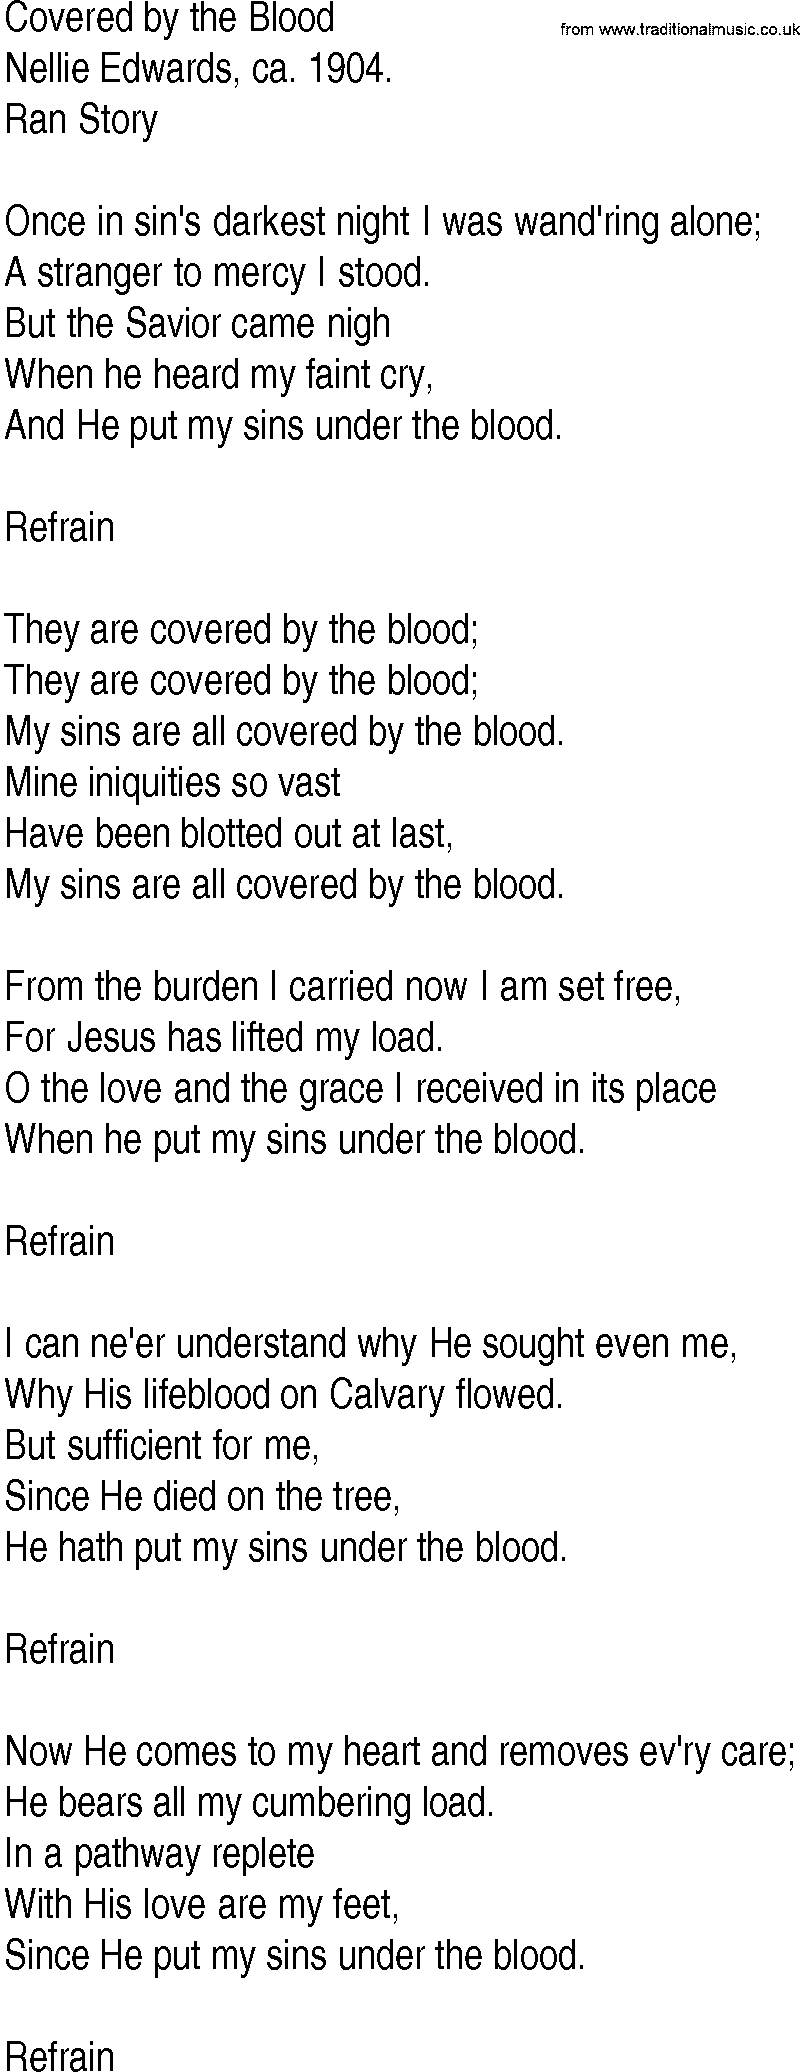 Hymn and Gospel Song: Covered by the Blood by Nellie Edwards ca lyrics